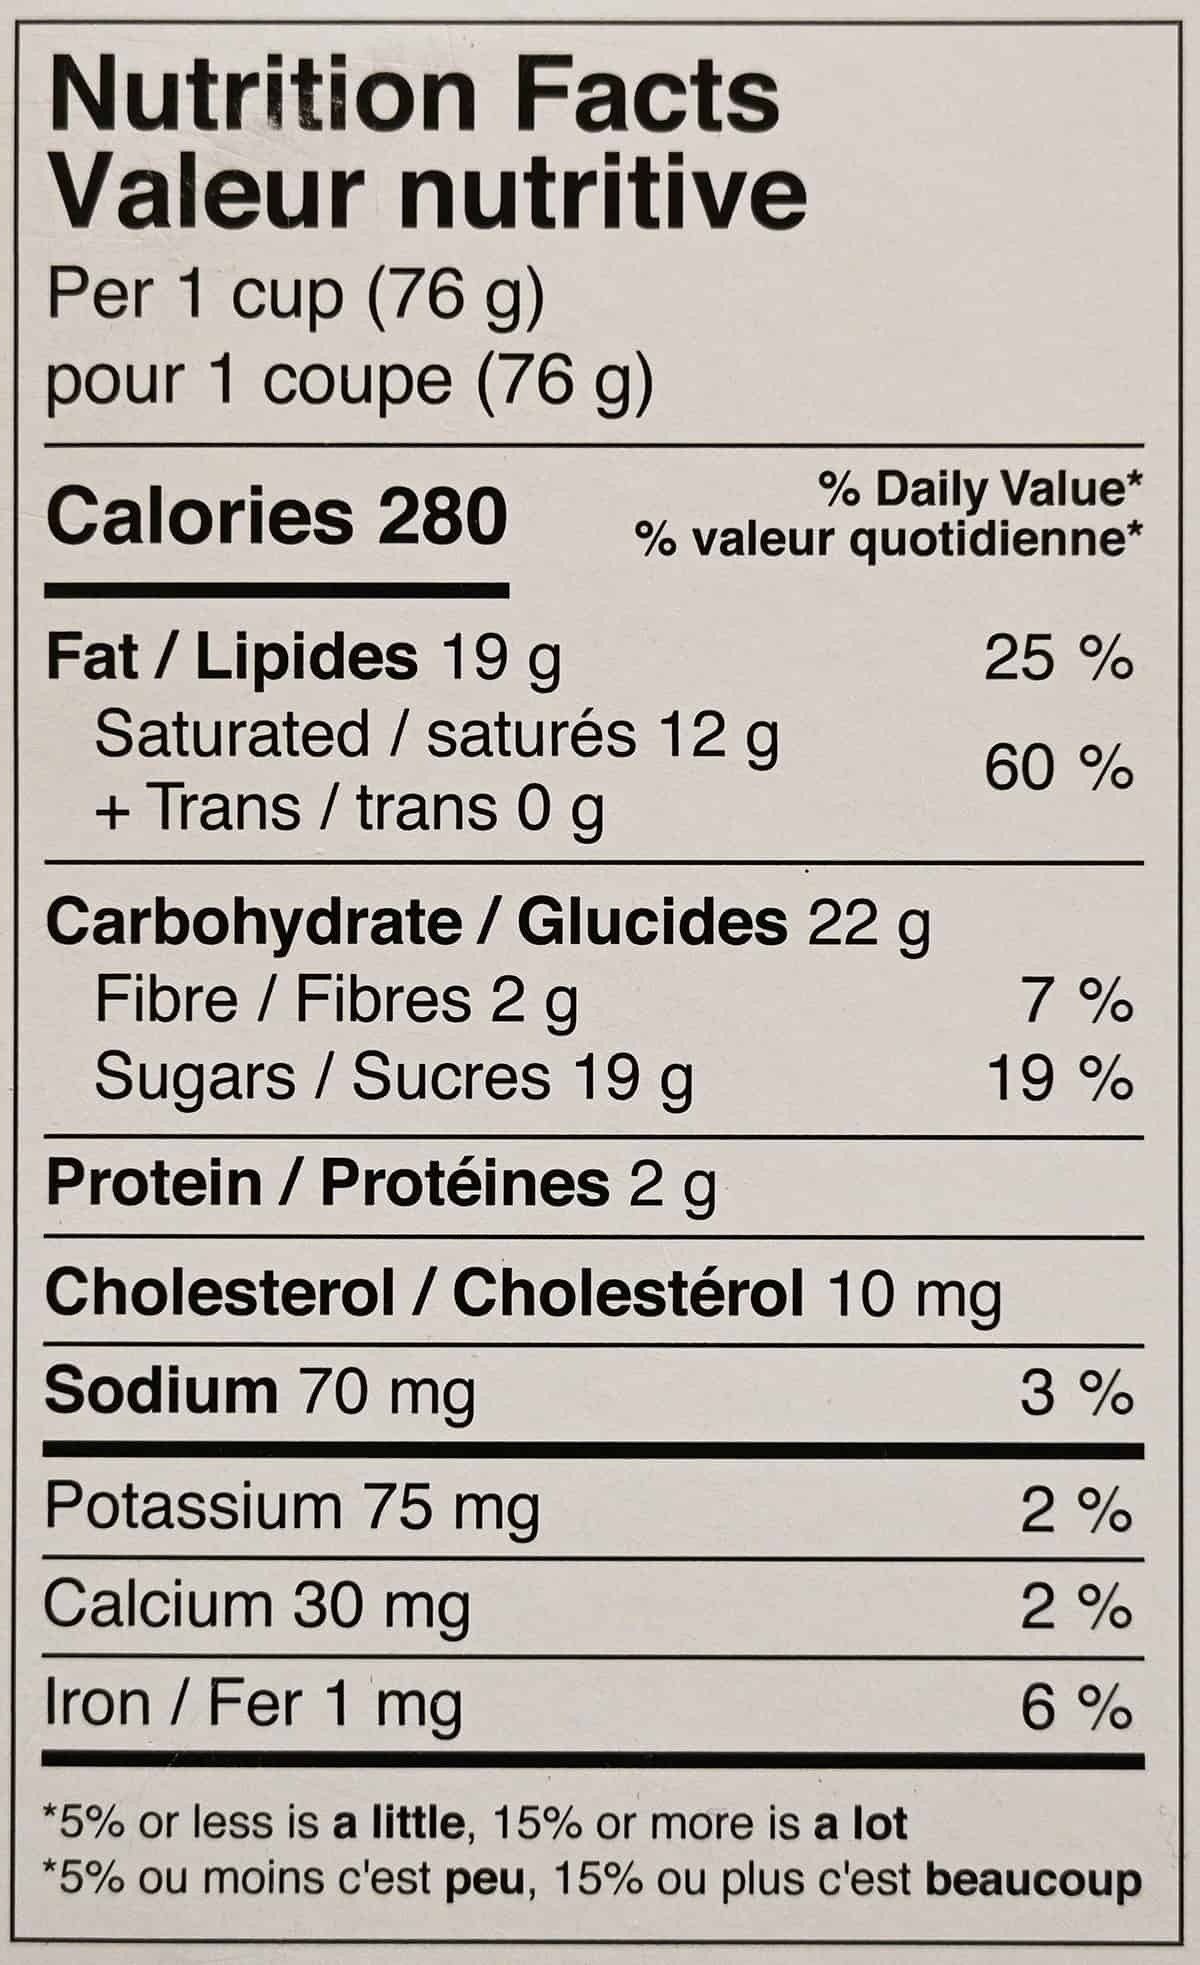 Image of the nutrition facts from the mousse package.